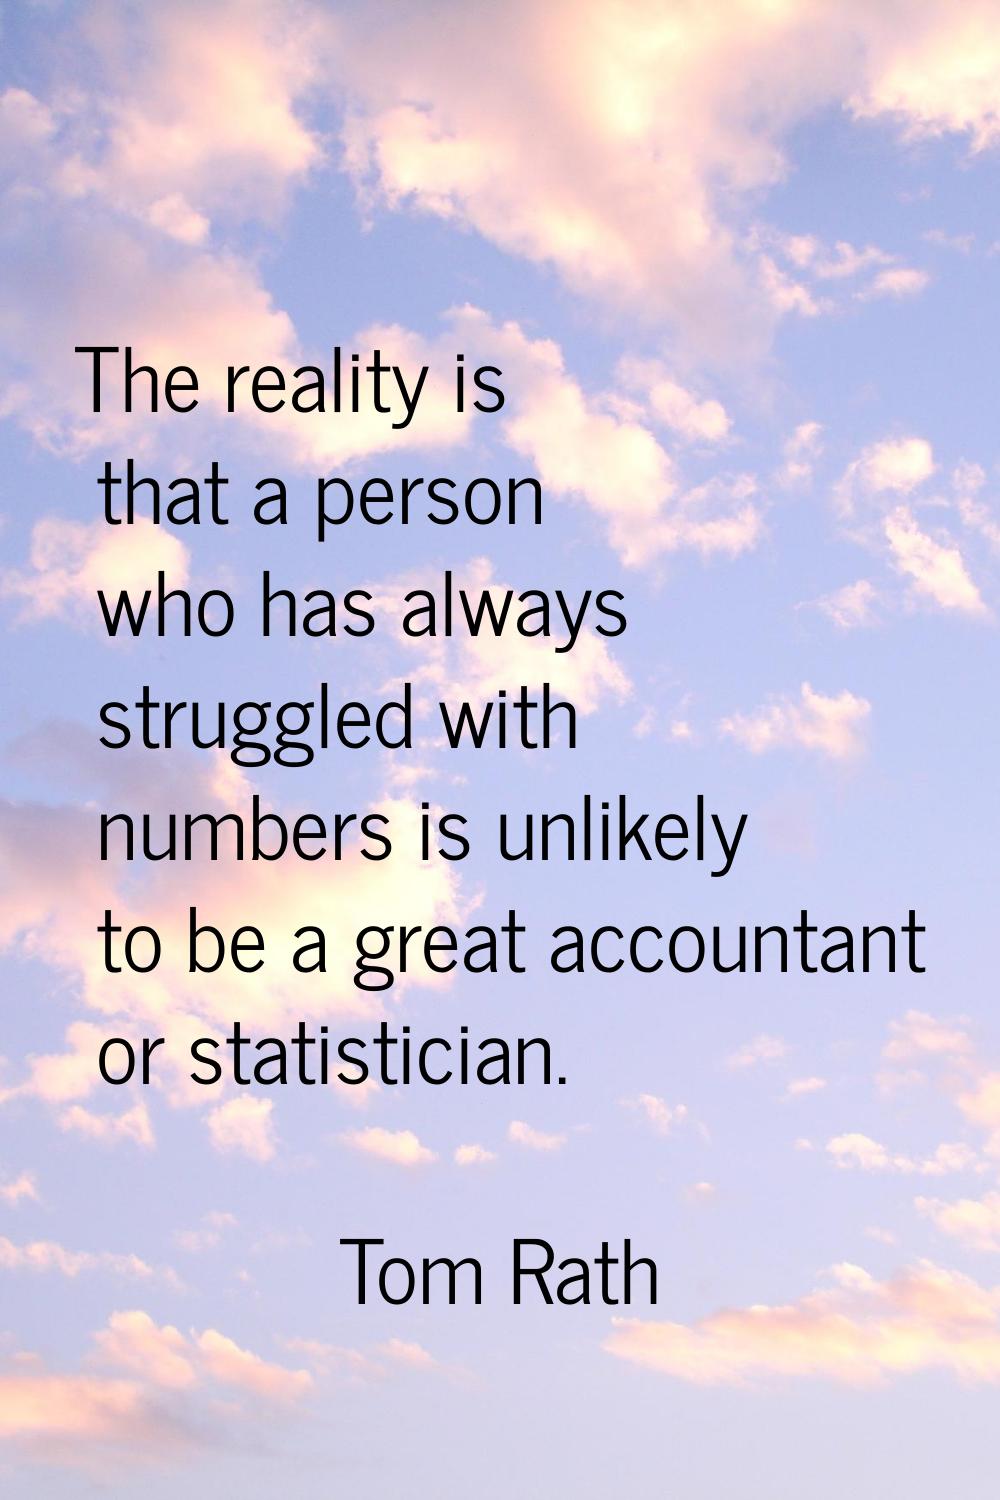 The reality is that a person who has always struggled with numbers is unlikely to be a great accoun